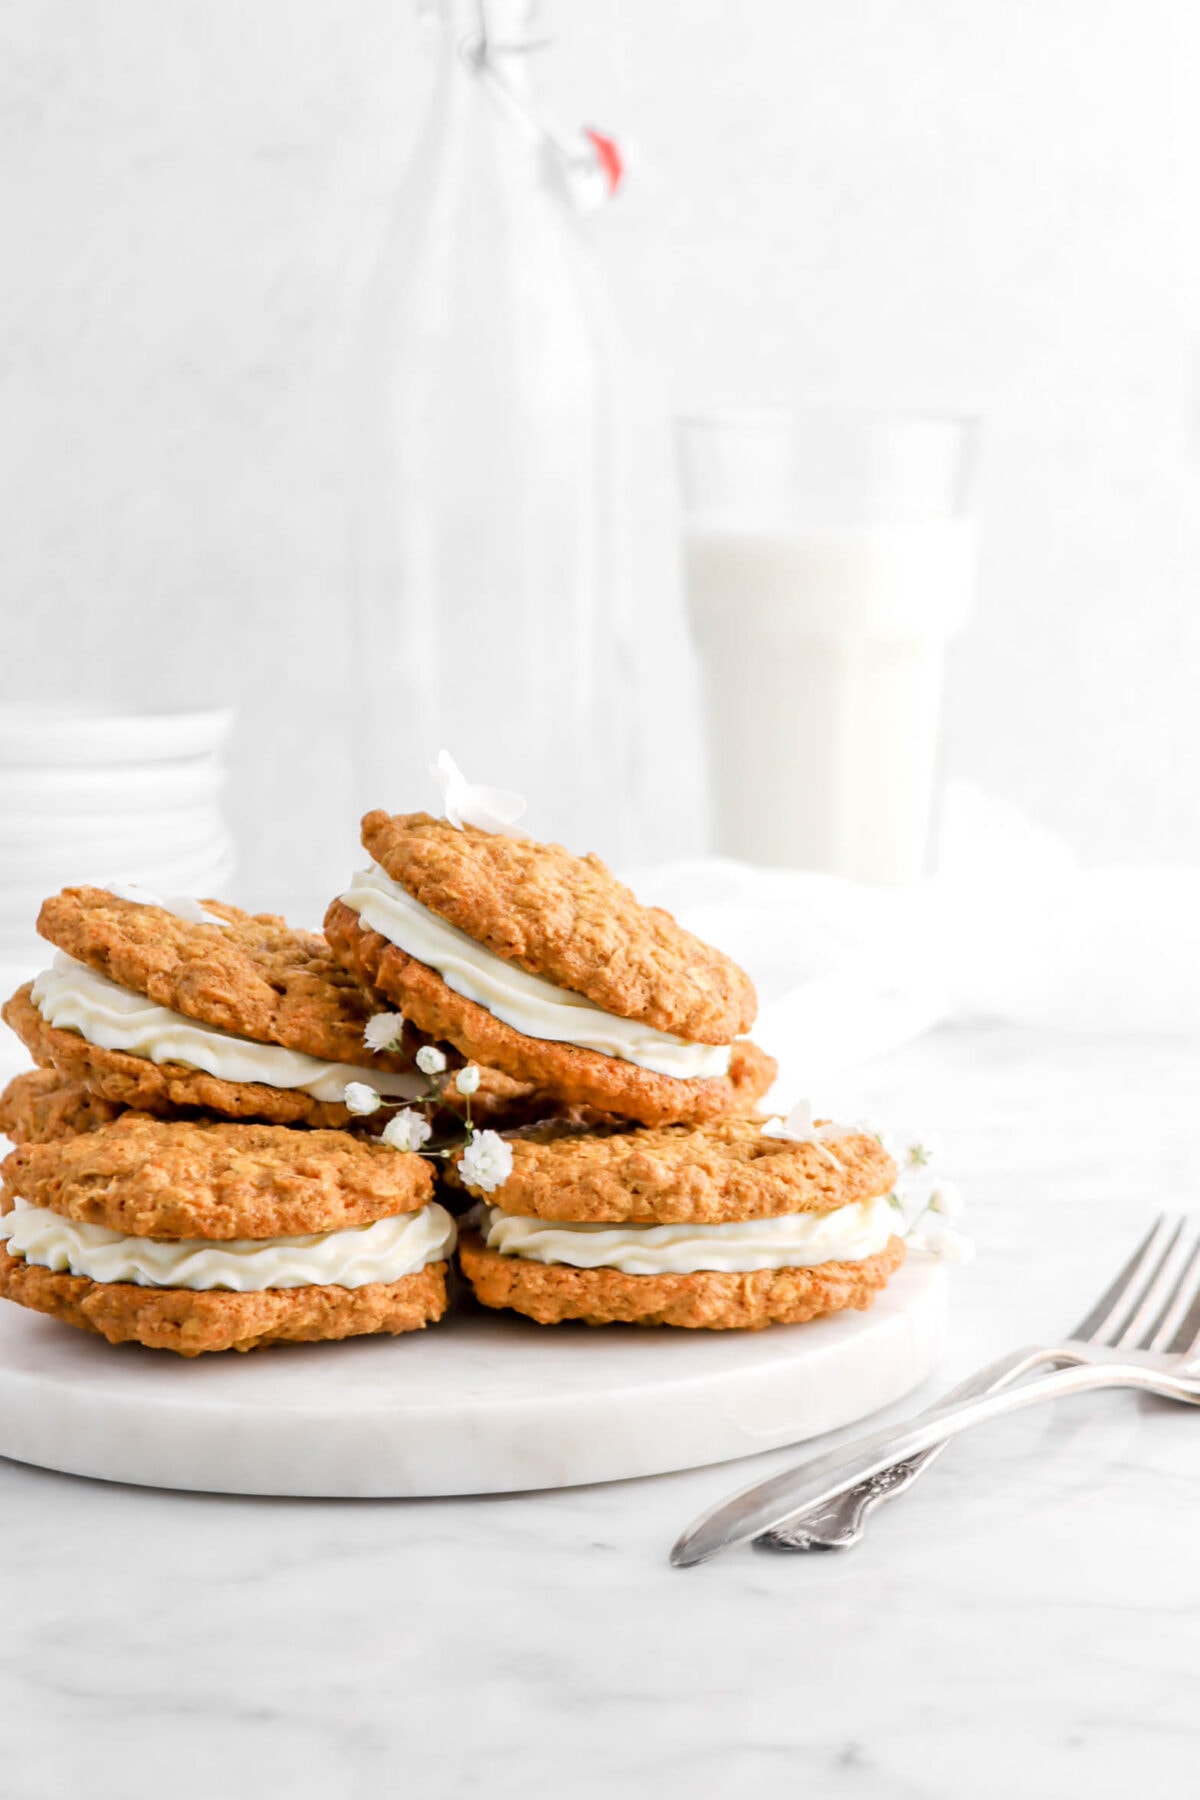 stacked carrot cake sandwich cookies on marble surface with two forks beside and glass of milk behind